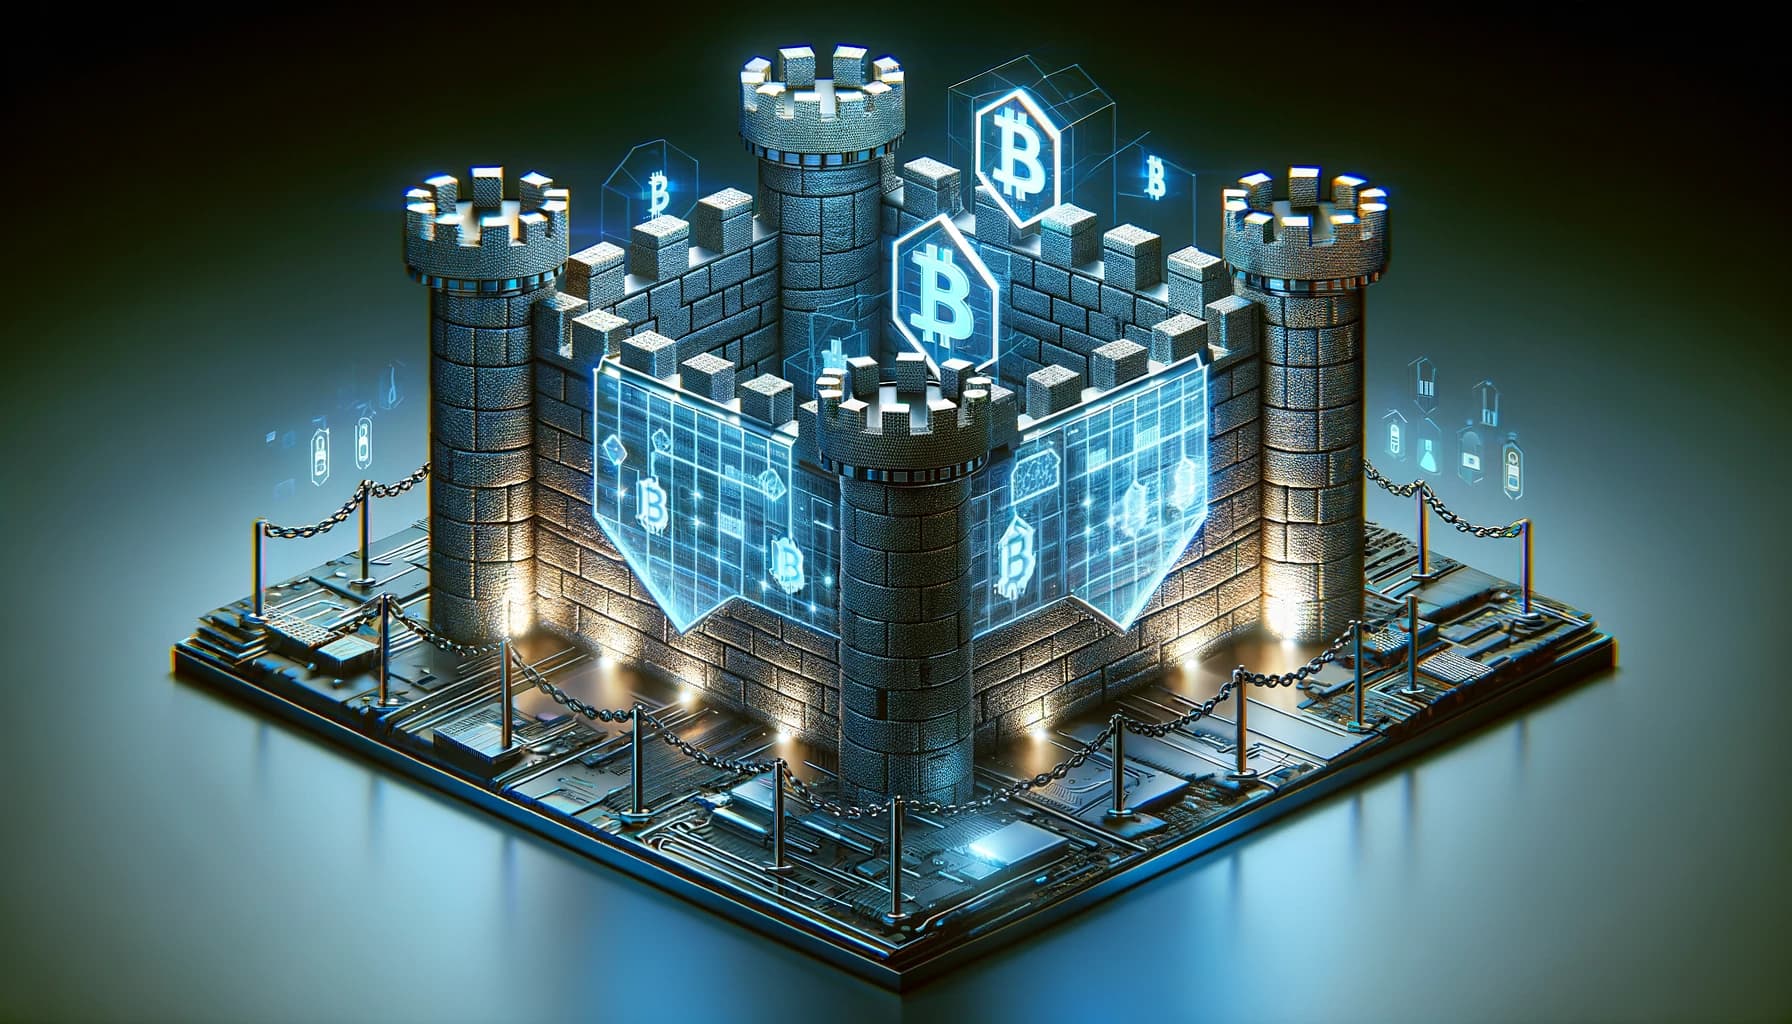 Bucket Technologies image showing a stone castle built around a Bitcoin block channel to indicate it's contents are secure.